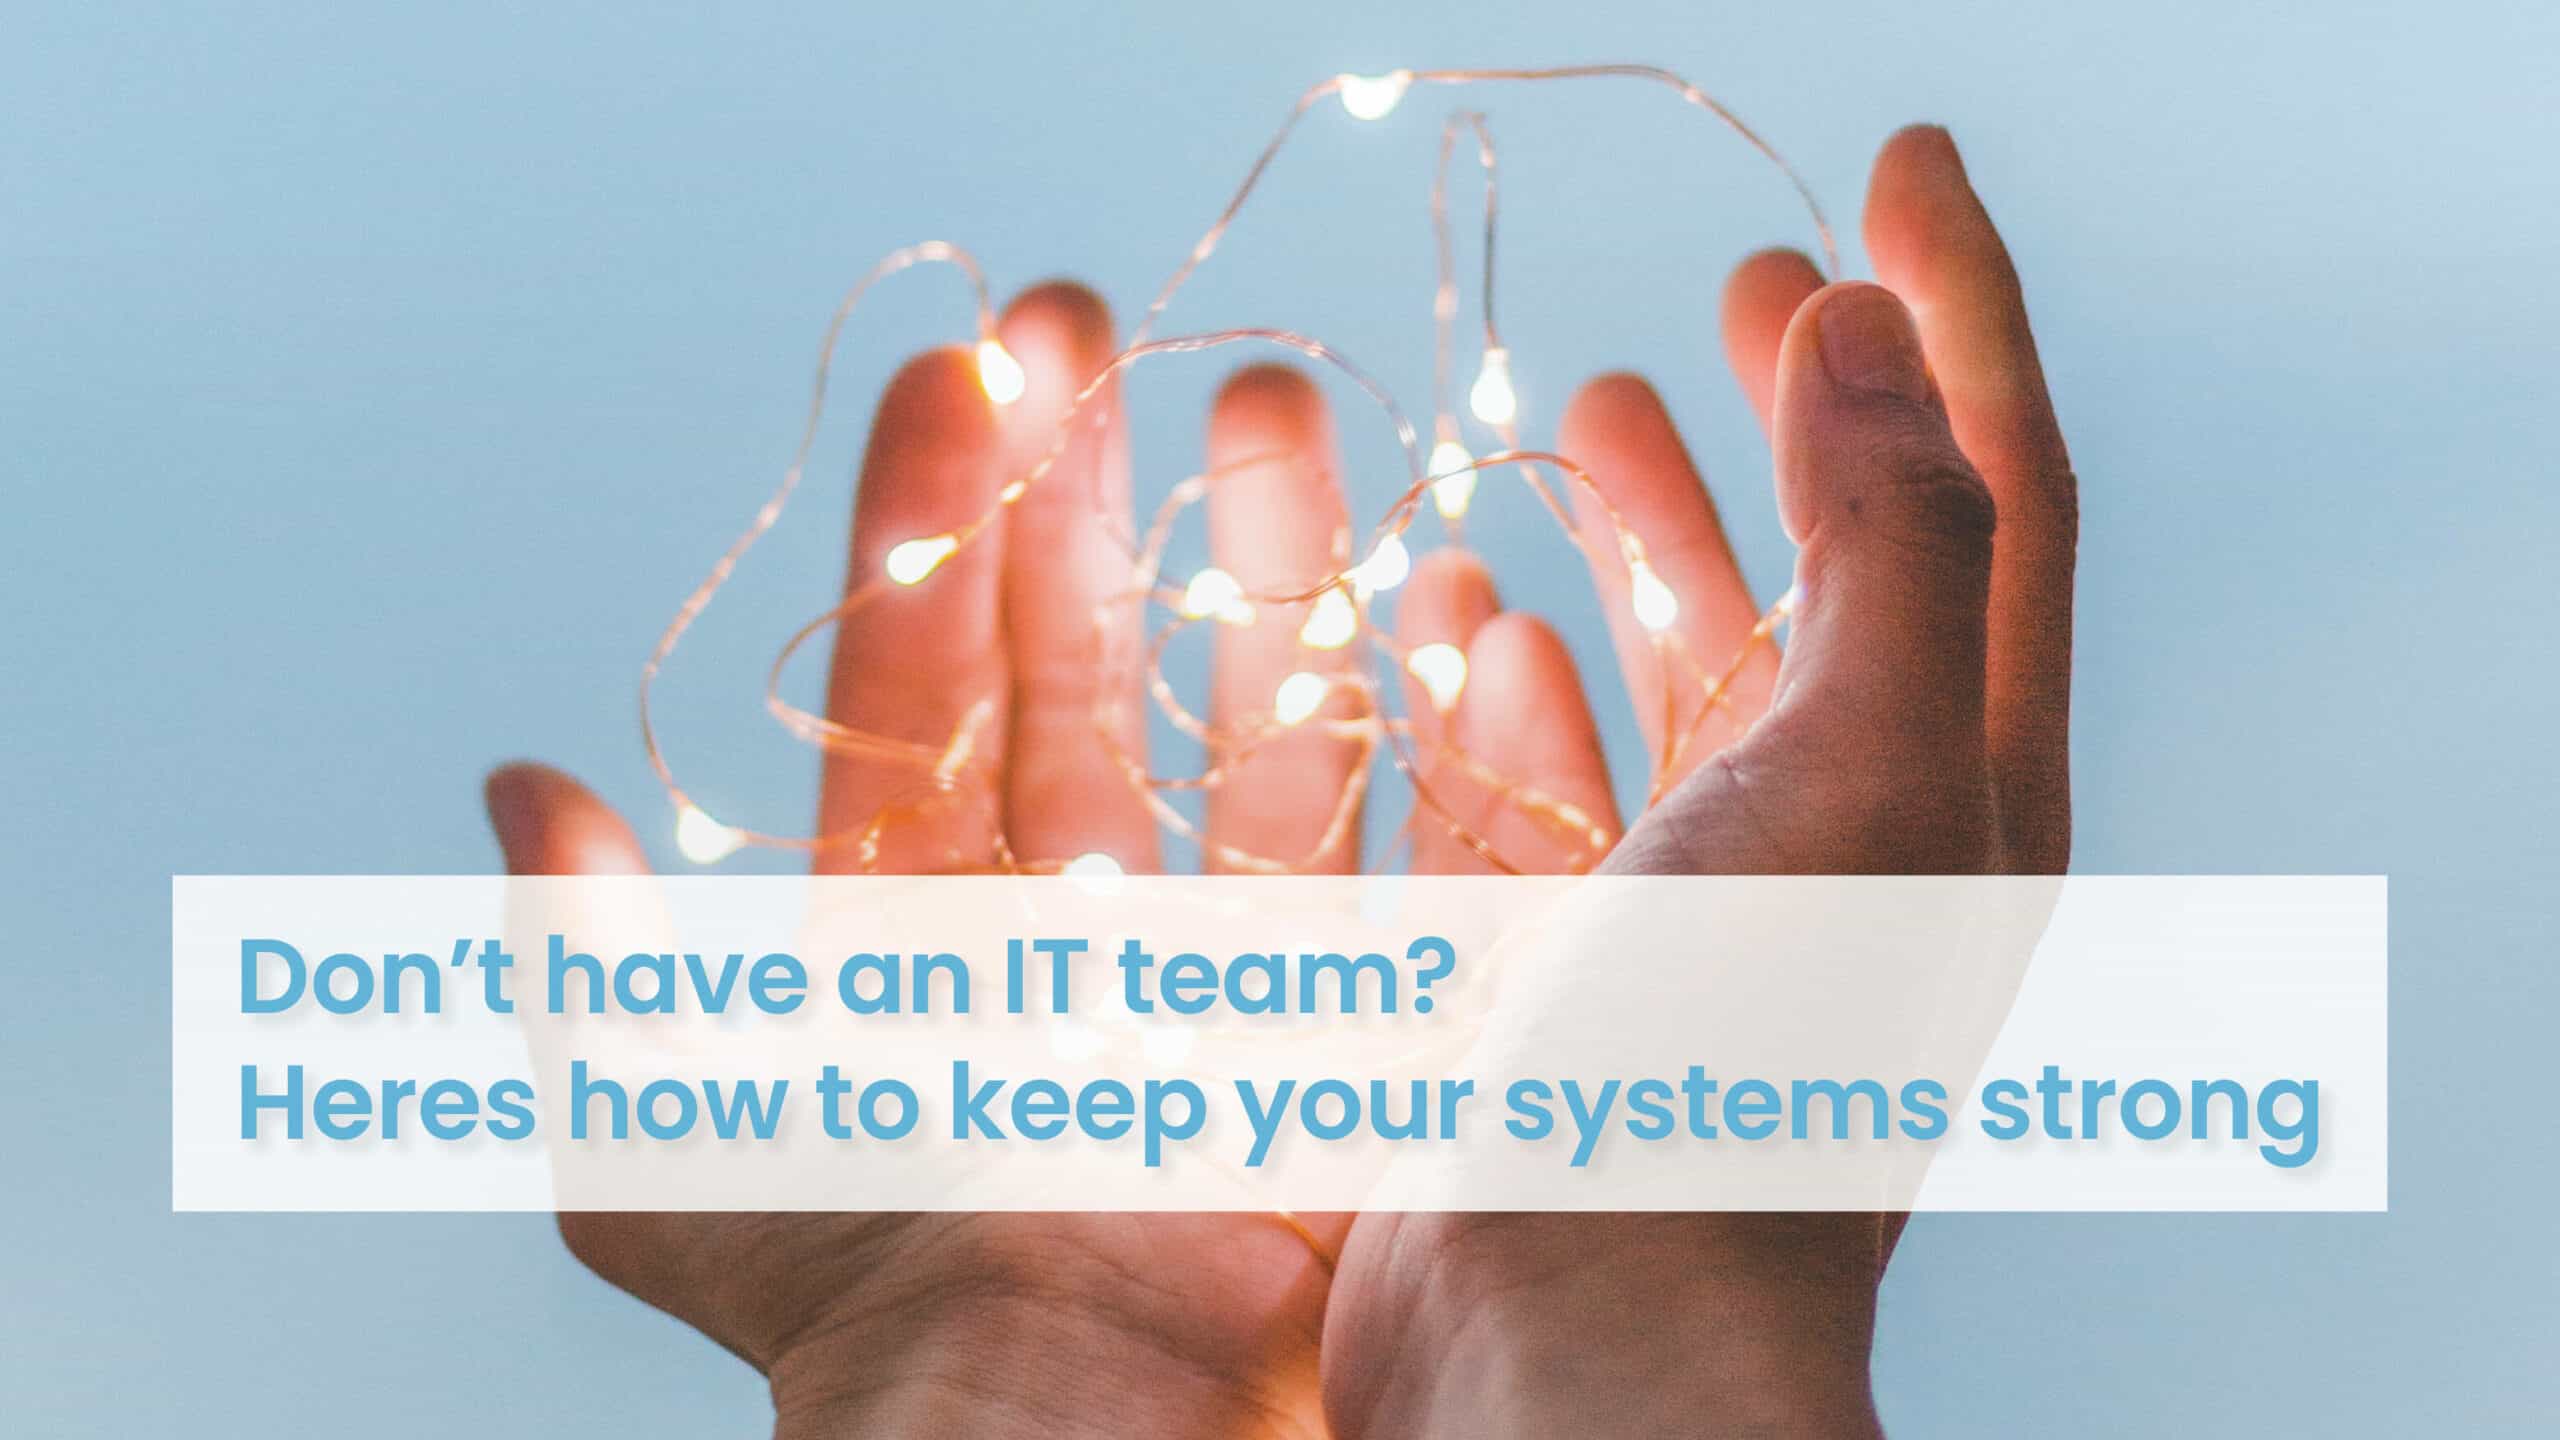 5 Tips For Keeping Systems Strong When You Don’t Have An IT Team